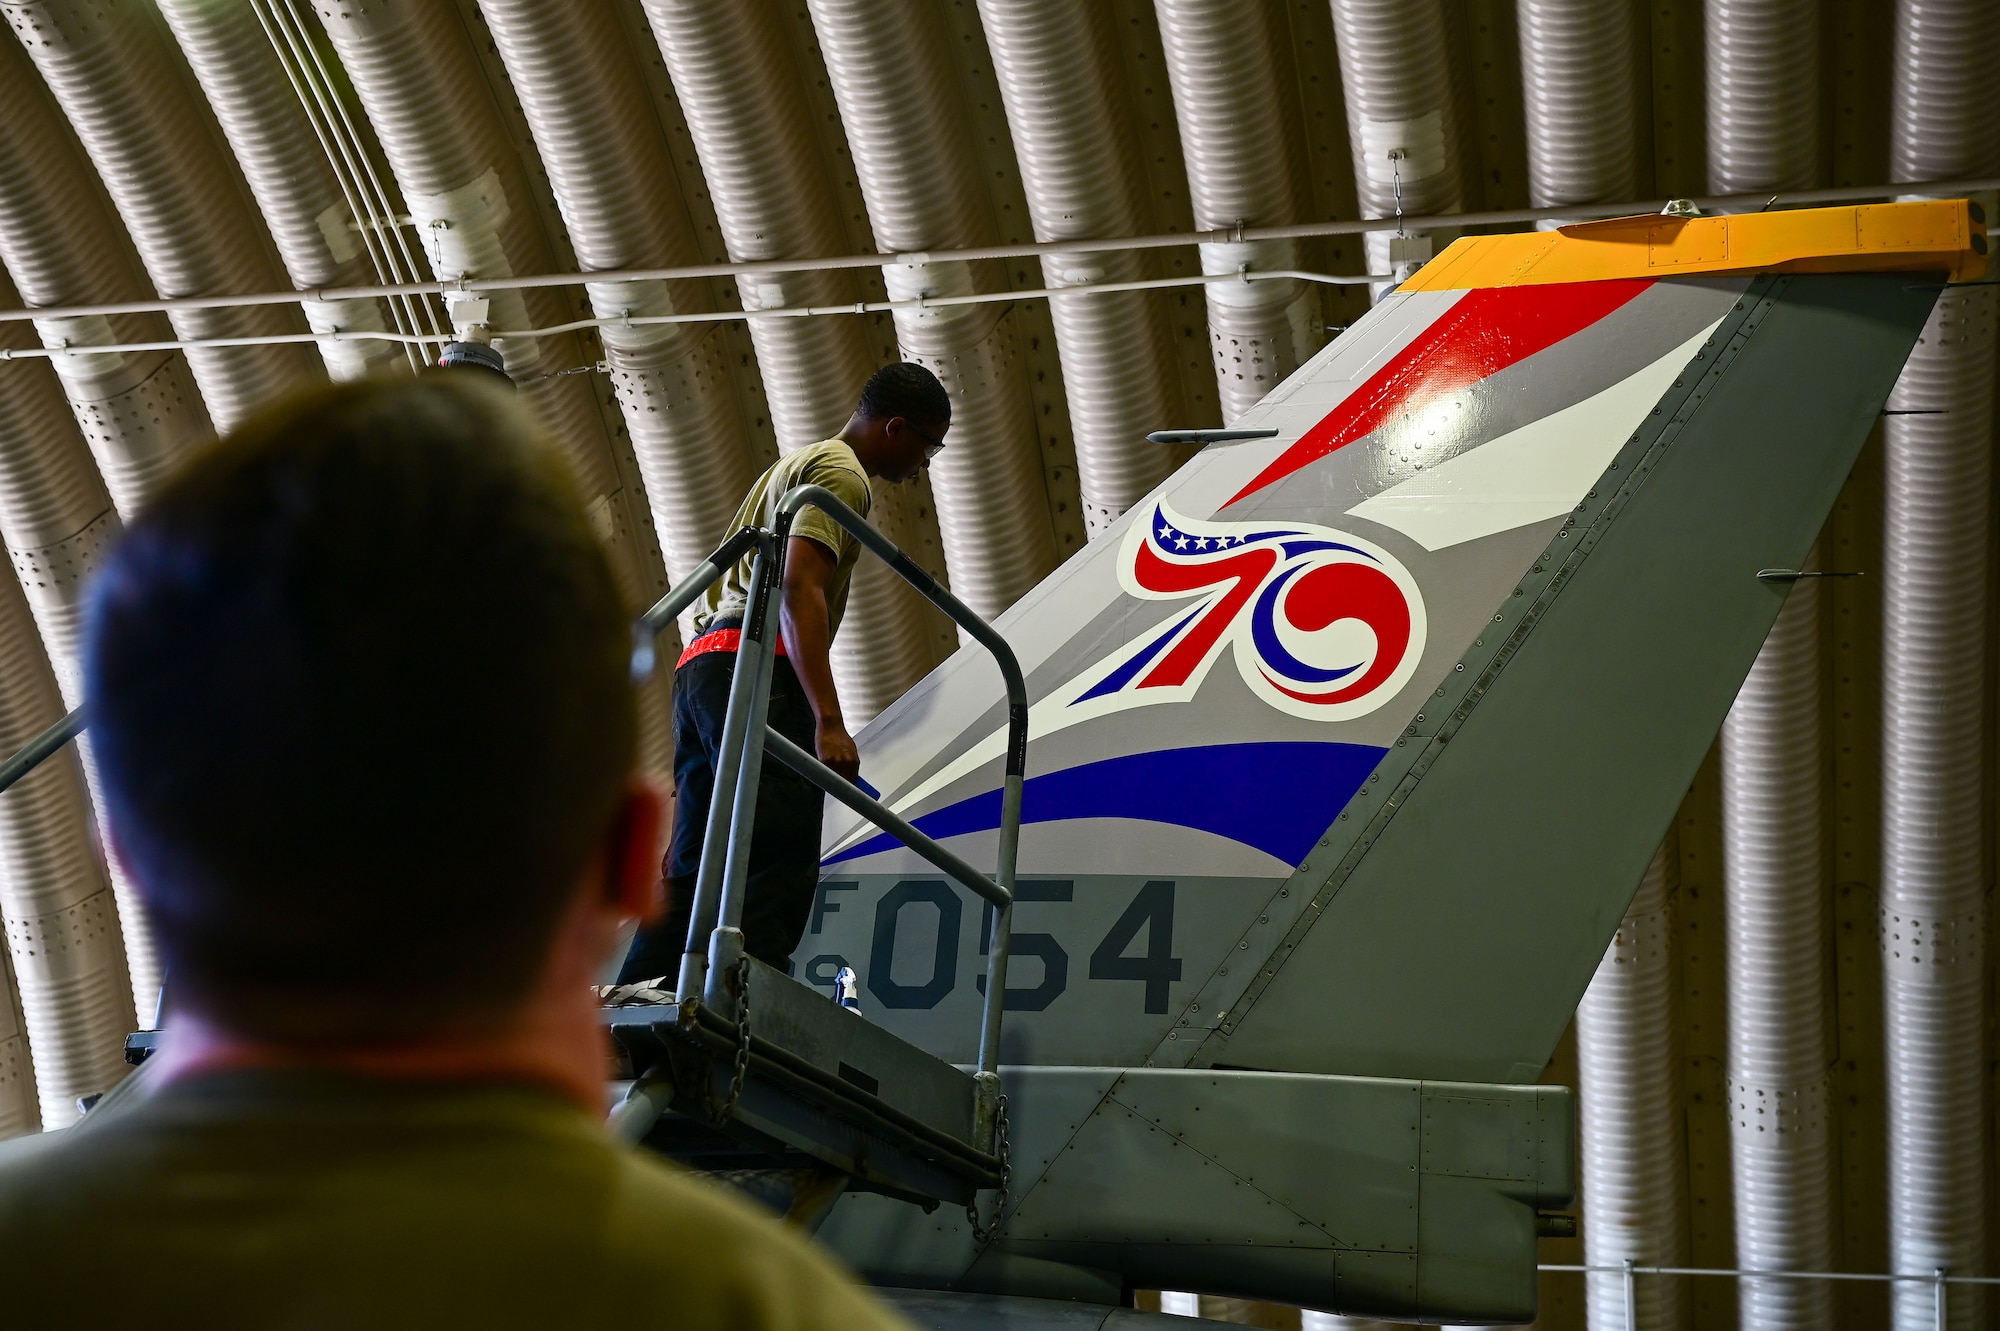 Staff Sgt. Matthew Campbell, 8th Maintenance Squadron aircraft structural maintenance (AMS) craftsman (left) assesses the application of a 70th anniversary heritage tail flash decal as Senior Airman Connor Young, 8th MXS AMS journeyman, looks on at Osan Air Base, Republic of Korea, May 1, 2023. Between measuring, application and preservation, the process can take up to 48 hours for each aircraft. (U.S. Air Force photo by Tech. Sgt. Timothy Dischinat)